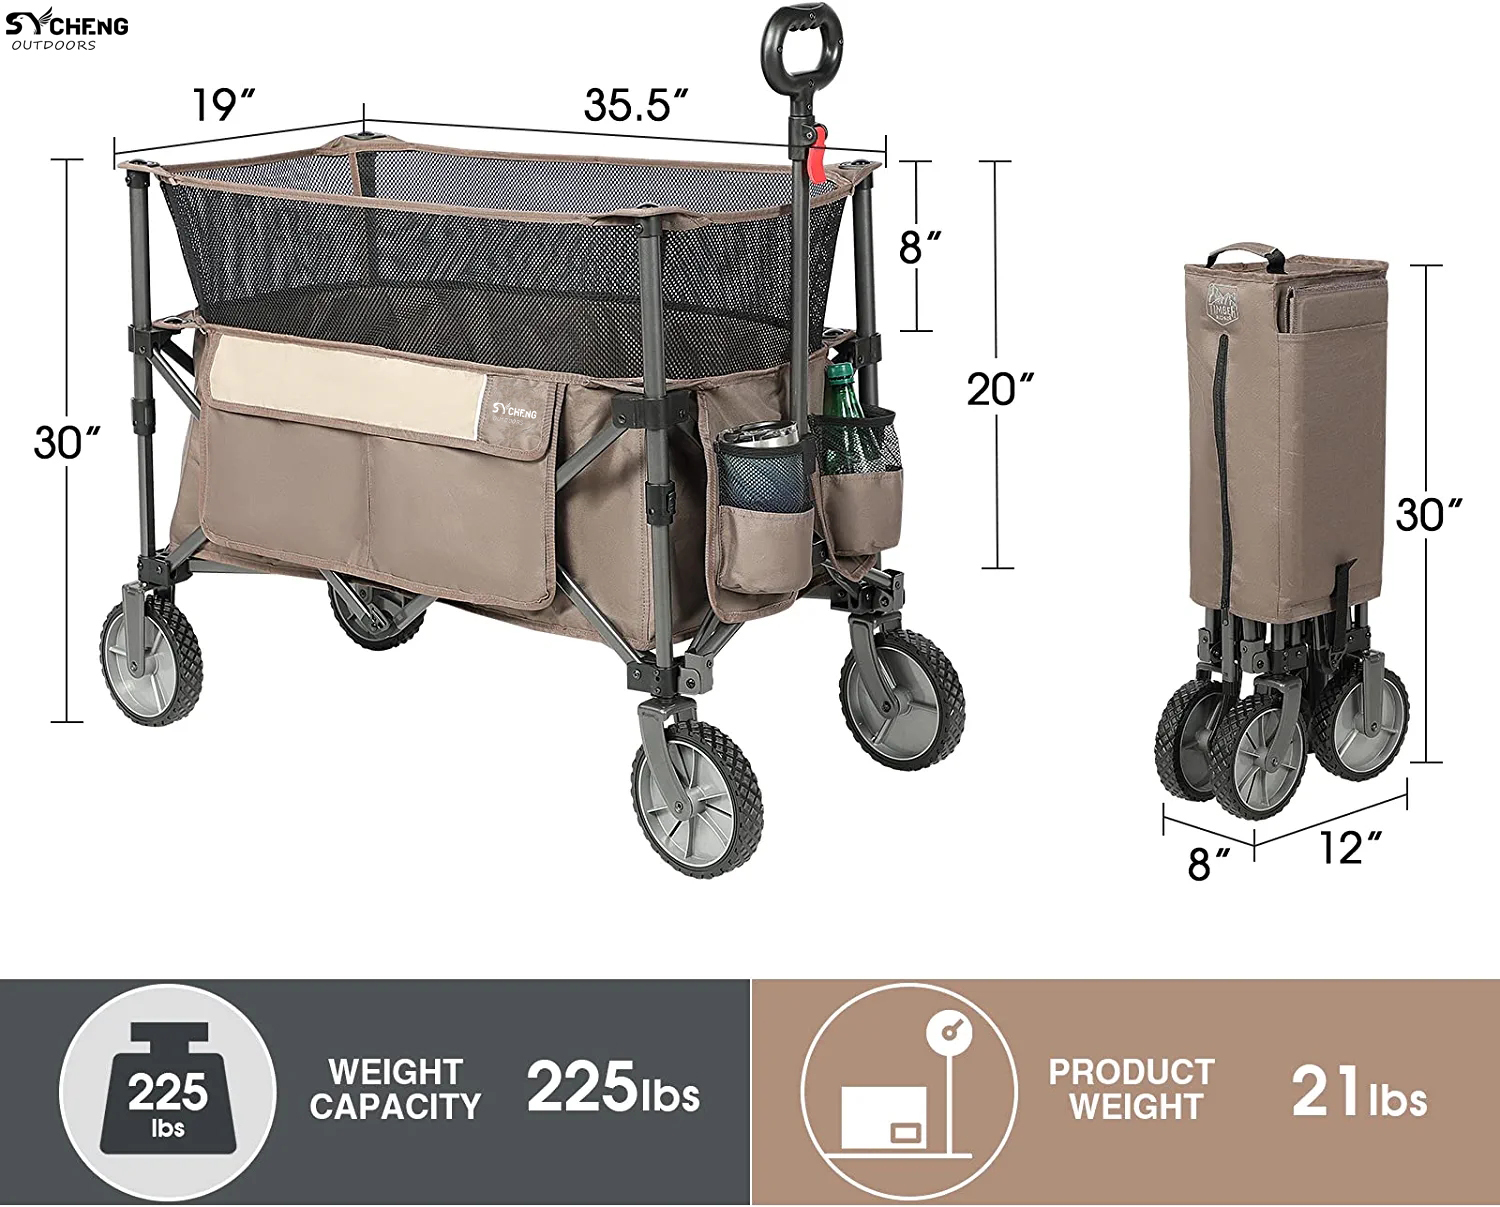 SYCHENG Bilayer Camping Folding Wagon, Wagon Cart Heavy Duty Foldable, Utility Grocery Wagon for Camping Shopping Sports